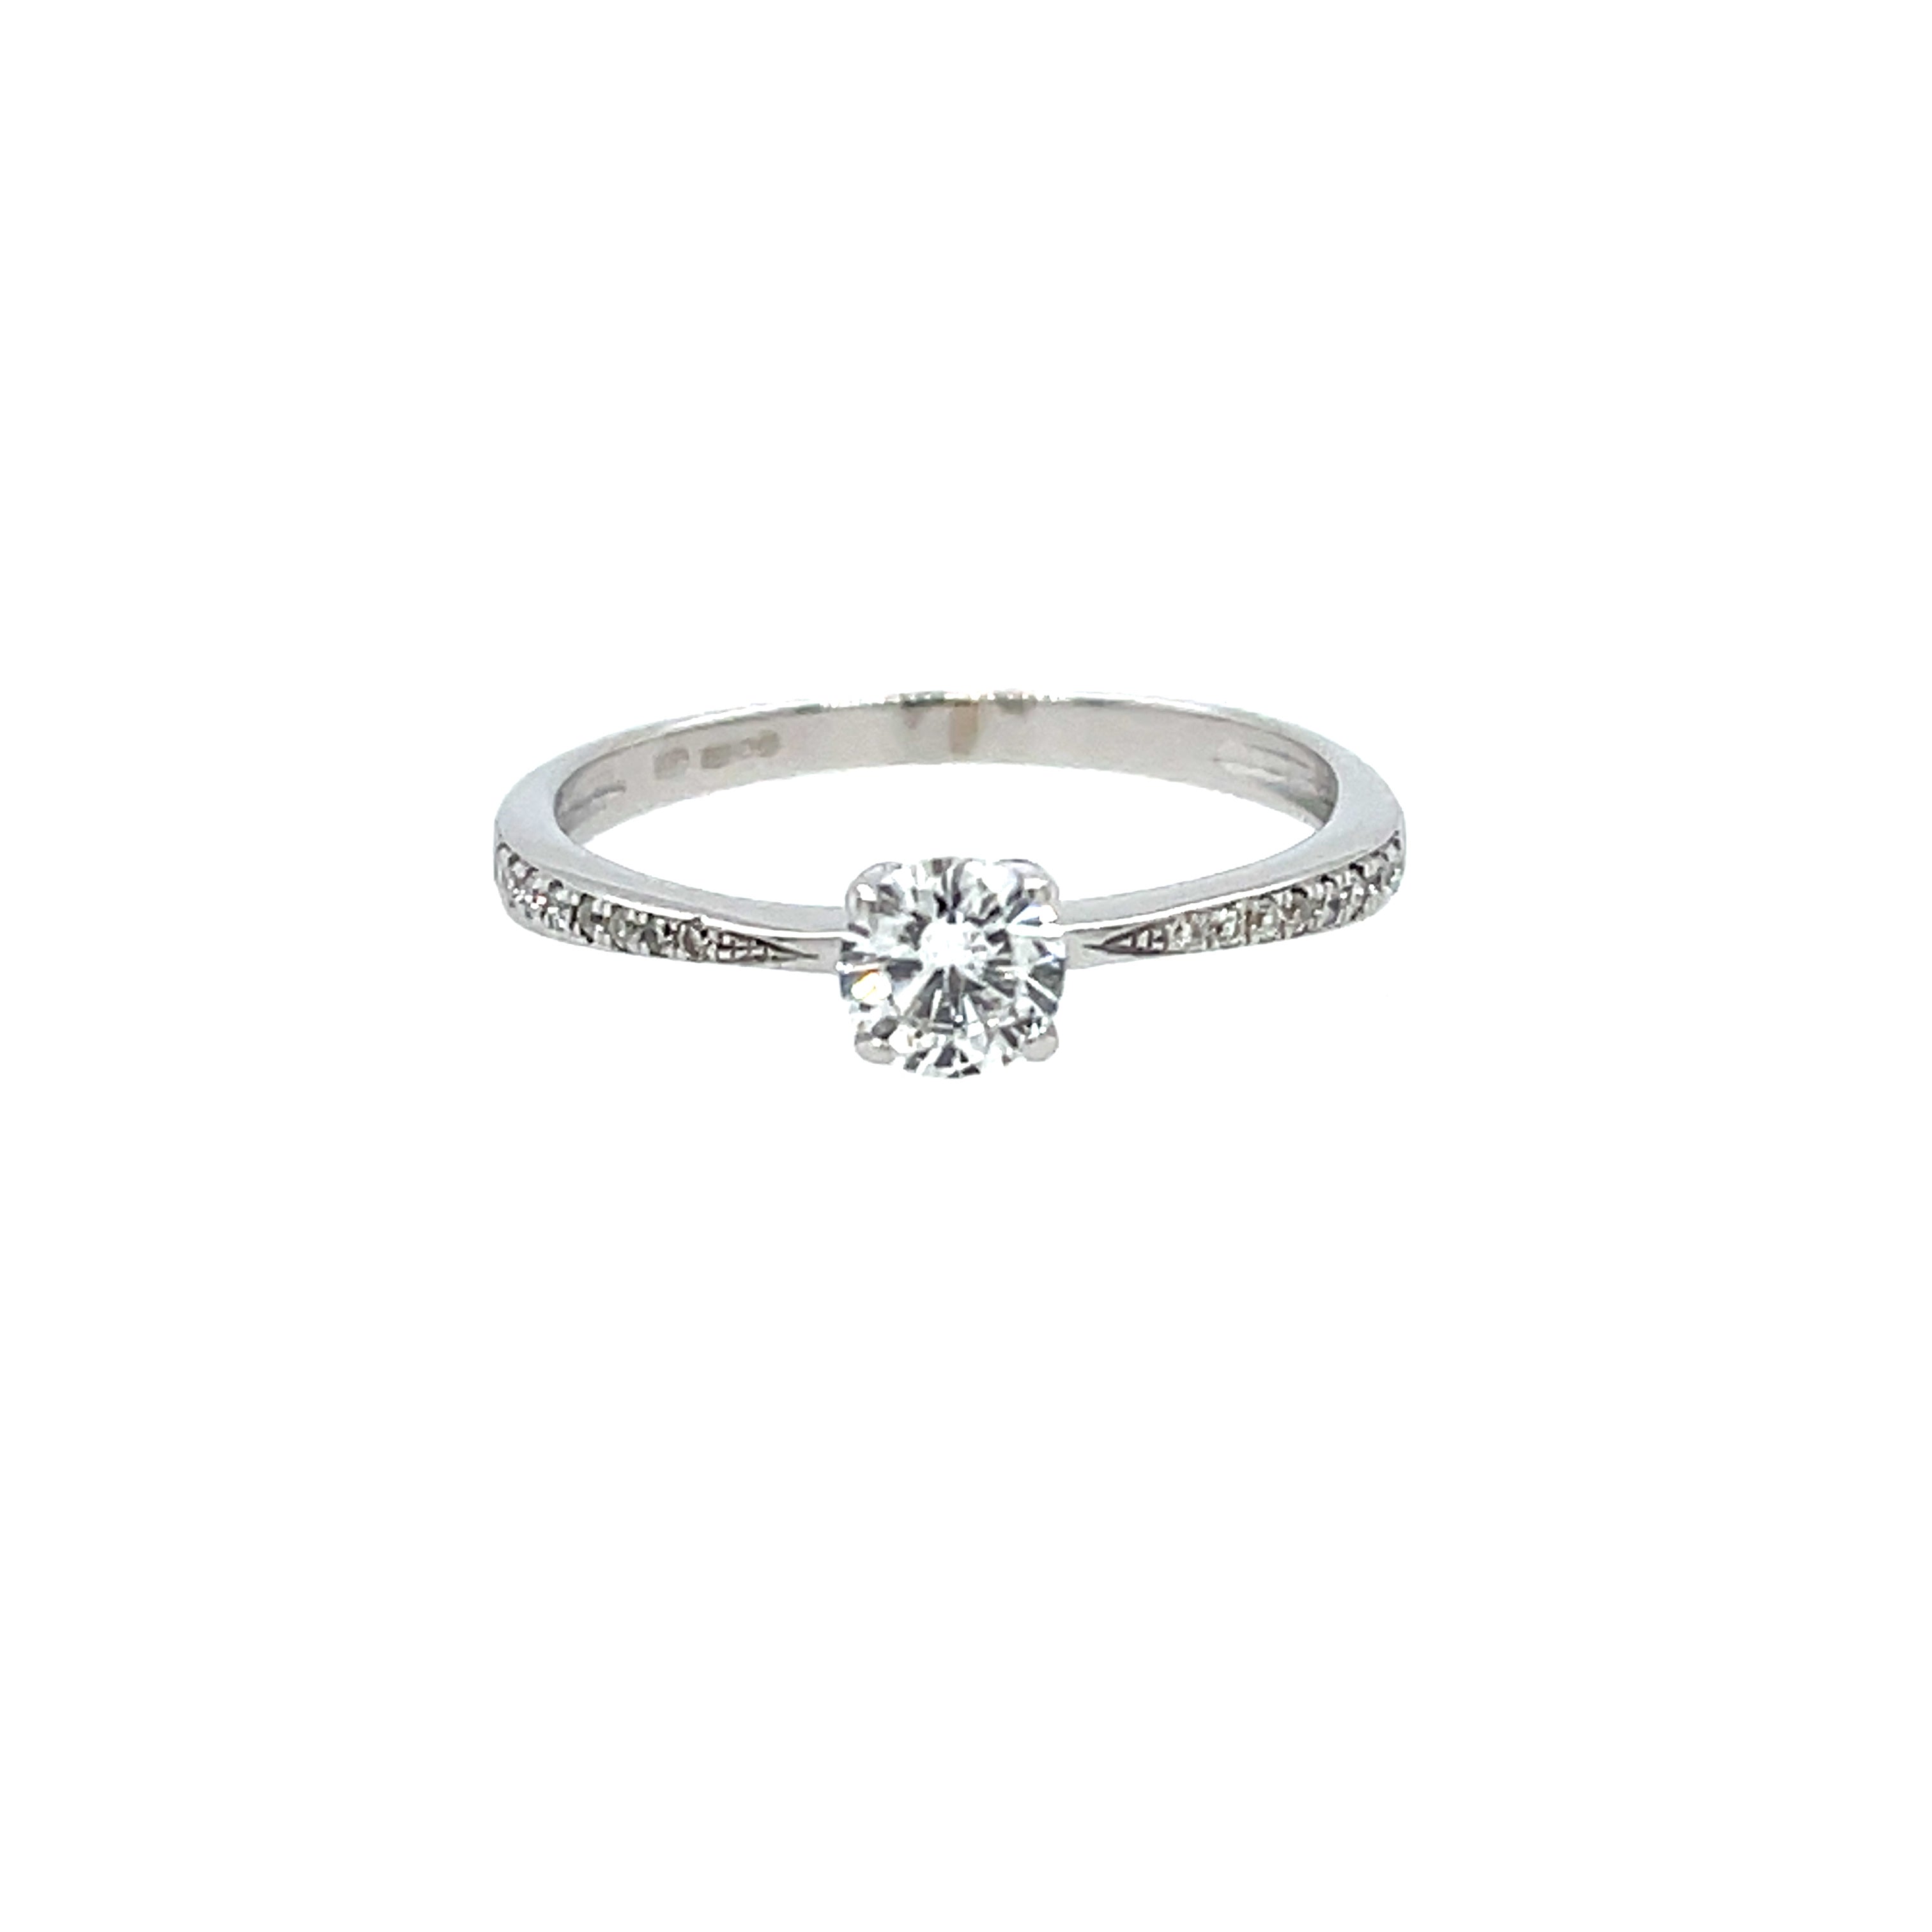 18ct White Gold 0.33ct Round Brilliant Cut Diamond Solitaire Engagement Ring With Diamond Shoulders